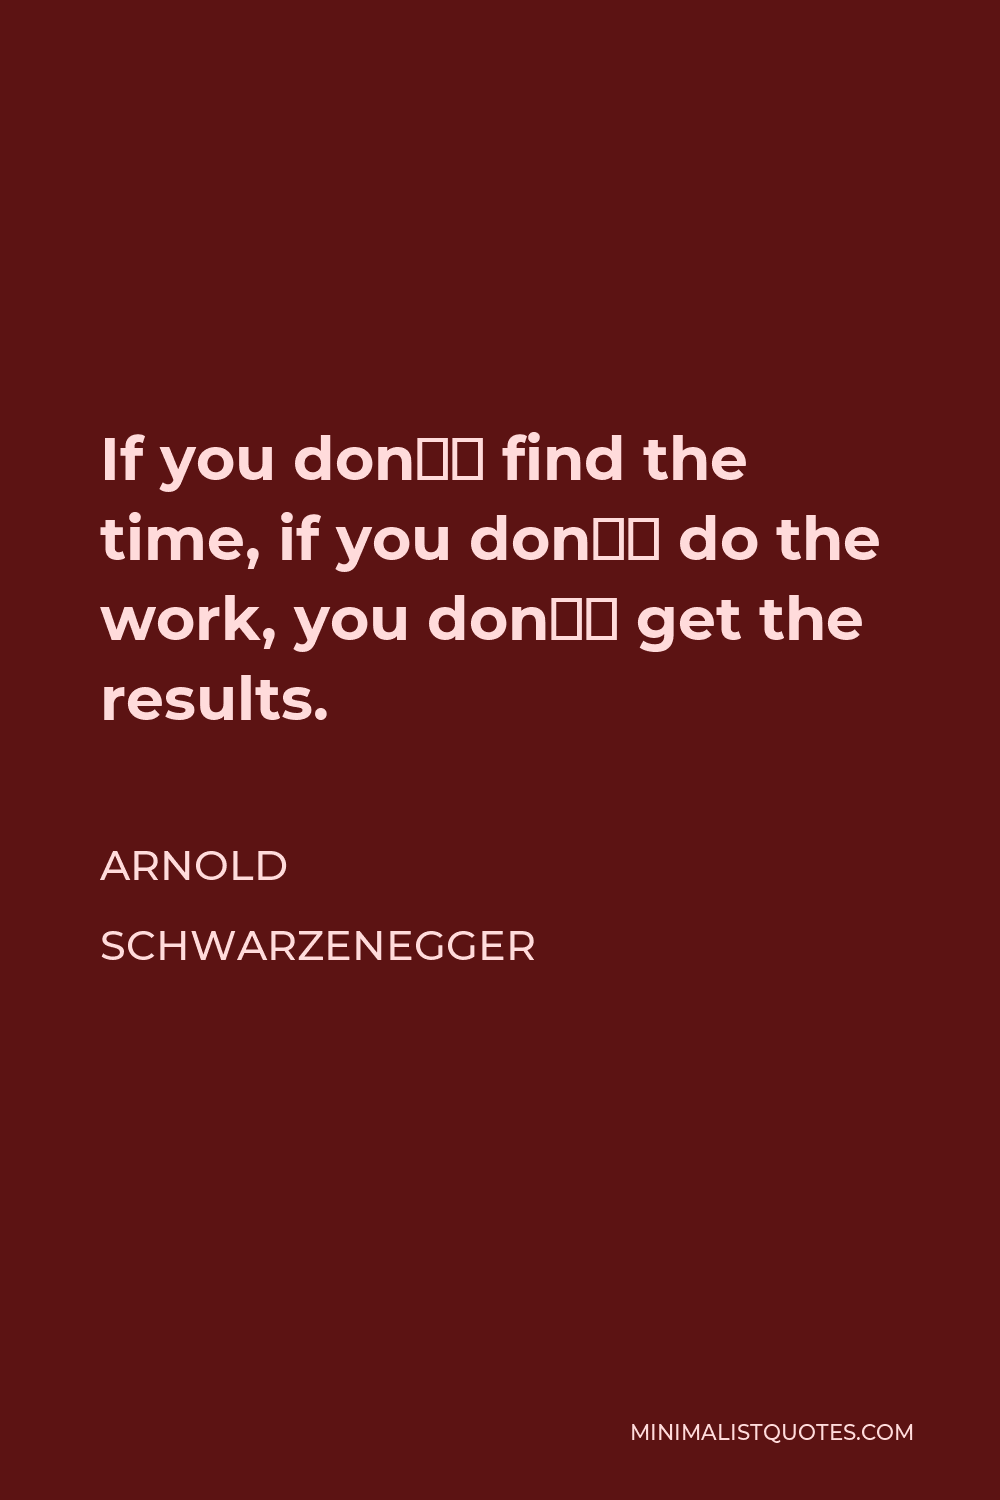 Arnold Schwarzenegger Quote - If you don’t find the time, if you don’t do the work, you don’t get the results.